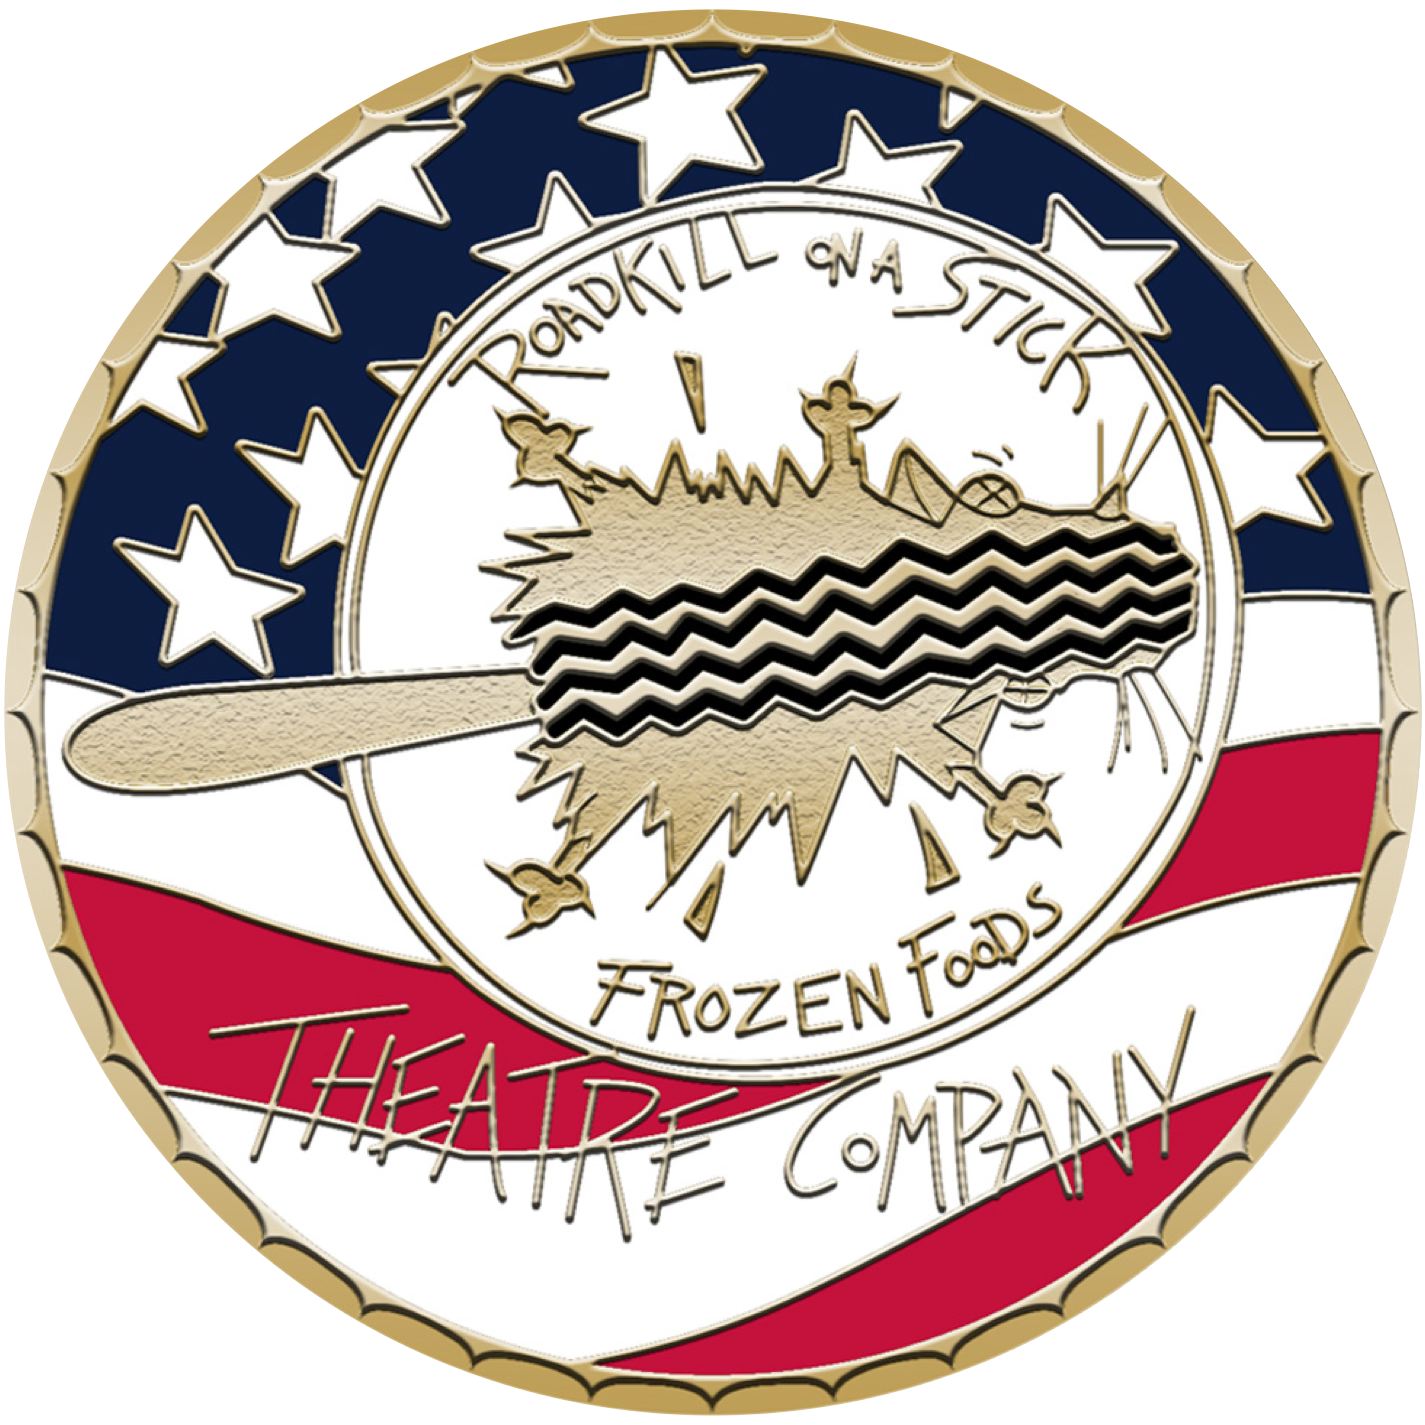 Round logo. A golden roadkill on a golden stick, with black tire tracks on its body, is splattered in the center. In the background are red and white stripes and white stars on a blue field. Hand-scrawled gold lettering reads: Roadkill On A Stick Frozen Foods Theatre Company. Logo design by Eric Scholl.